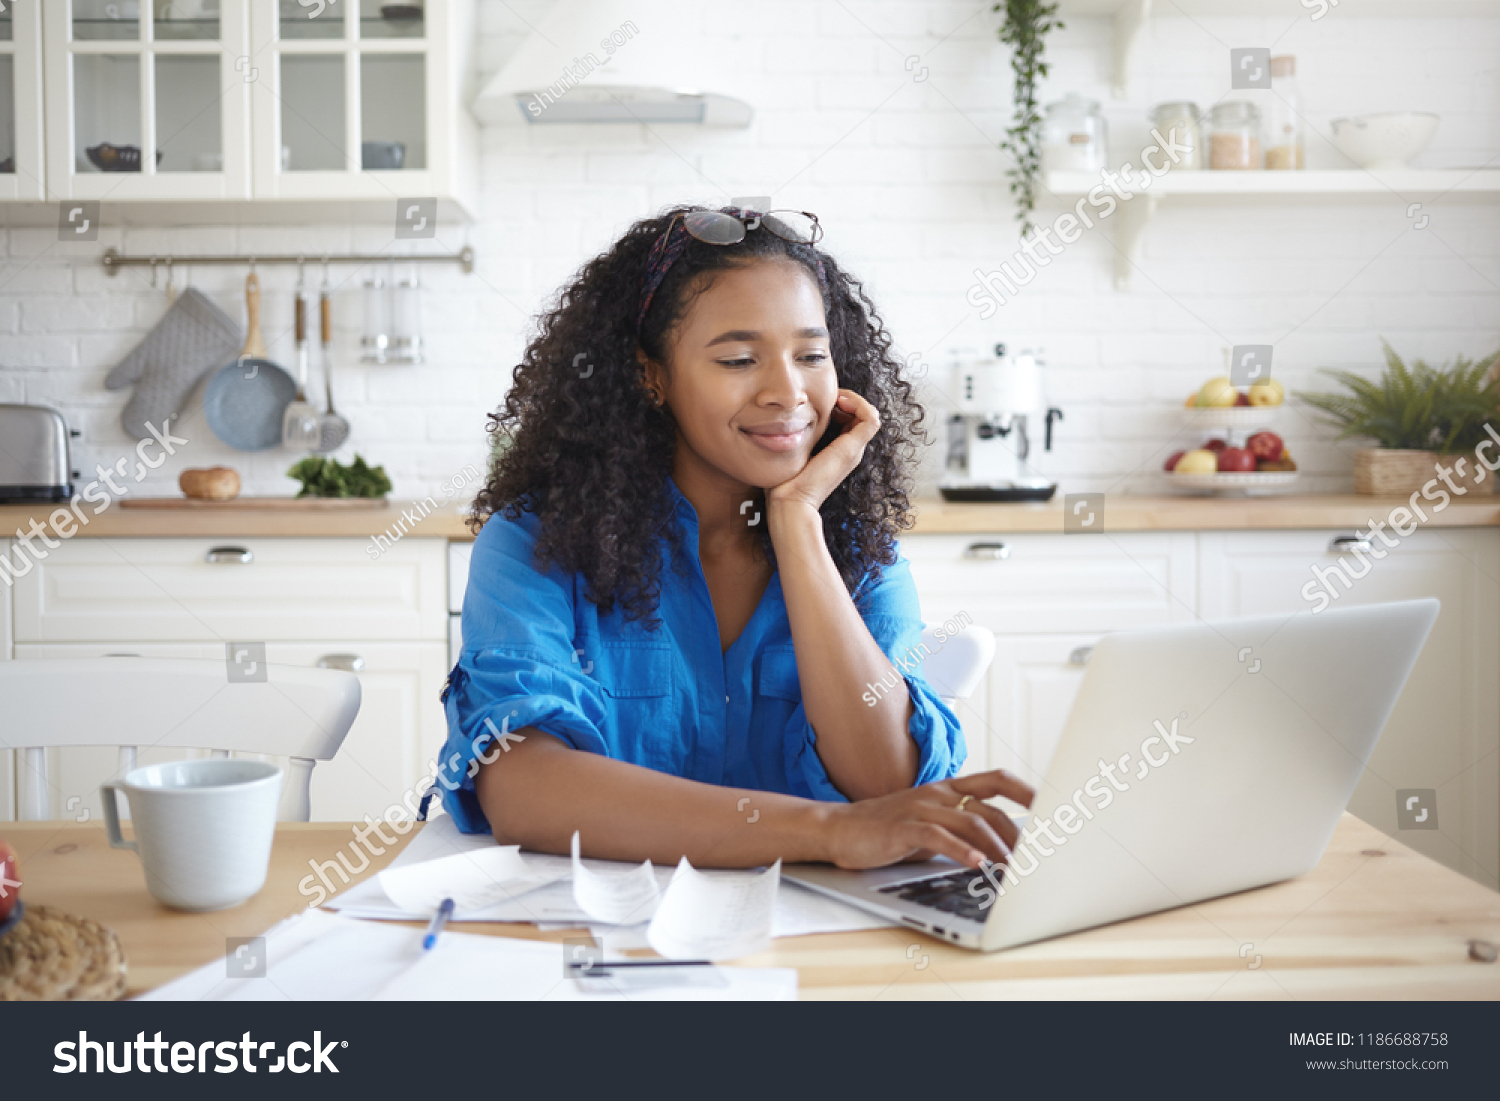 Indoor shot of happy young Afro American woman using portable computer and smiling, enjoying modern technology while paying bills for rent, gas and electricity online, sitting at kitchen table #1186688758